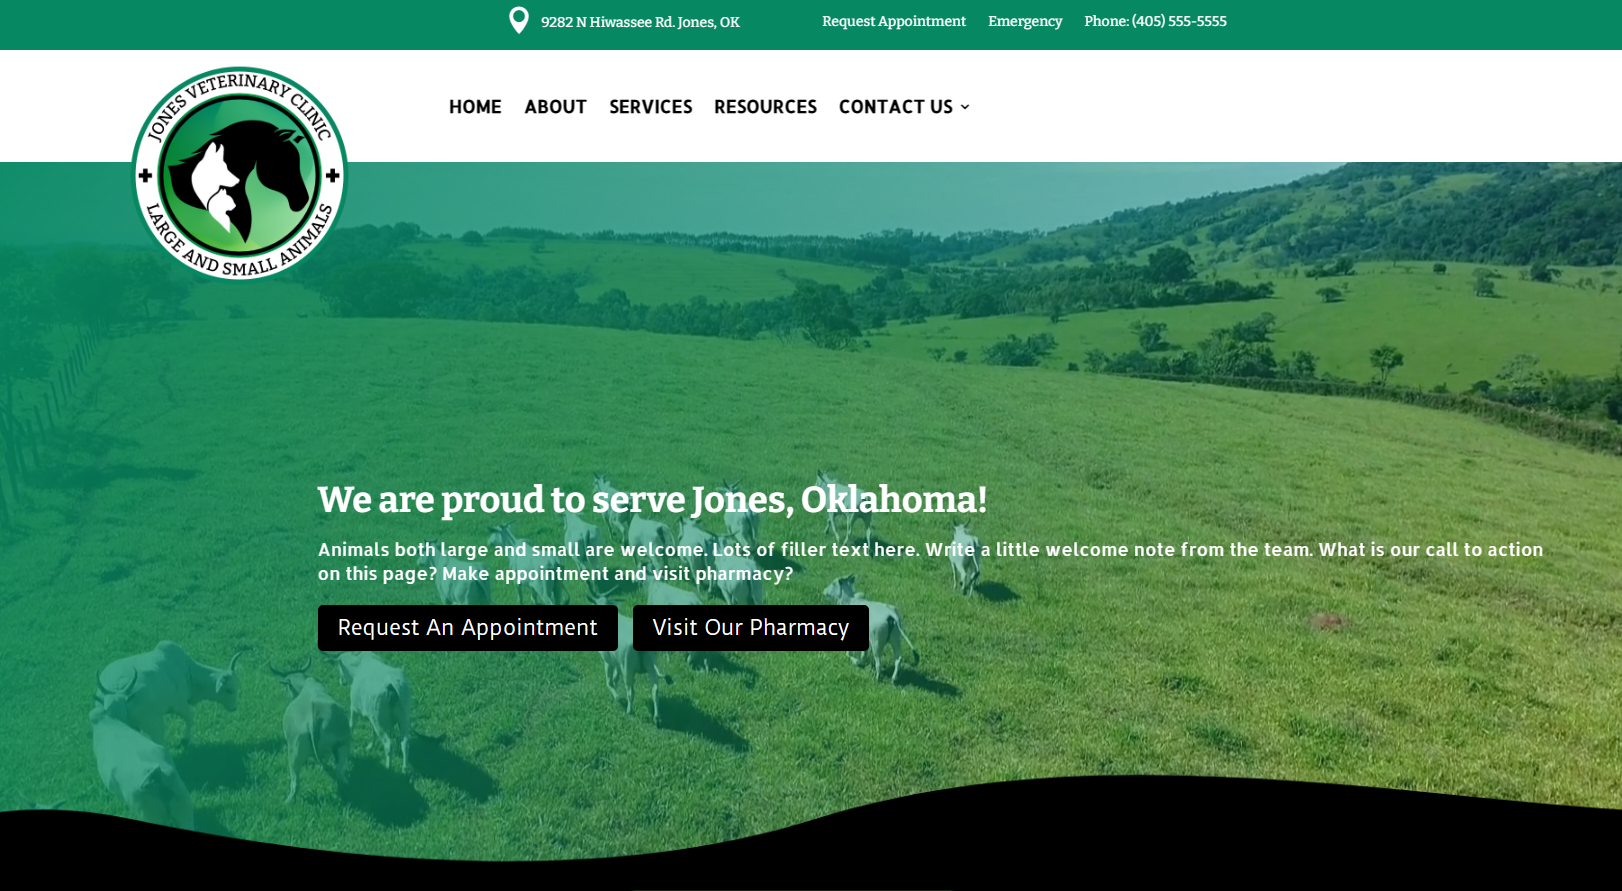 Image of the Jones Vet Clinic website header which includes a video of cows running through a pasture.